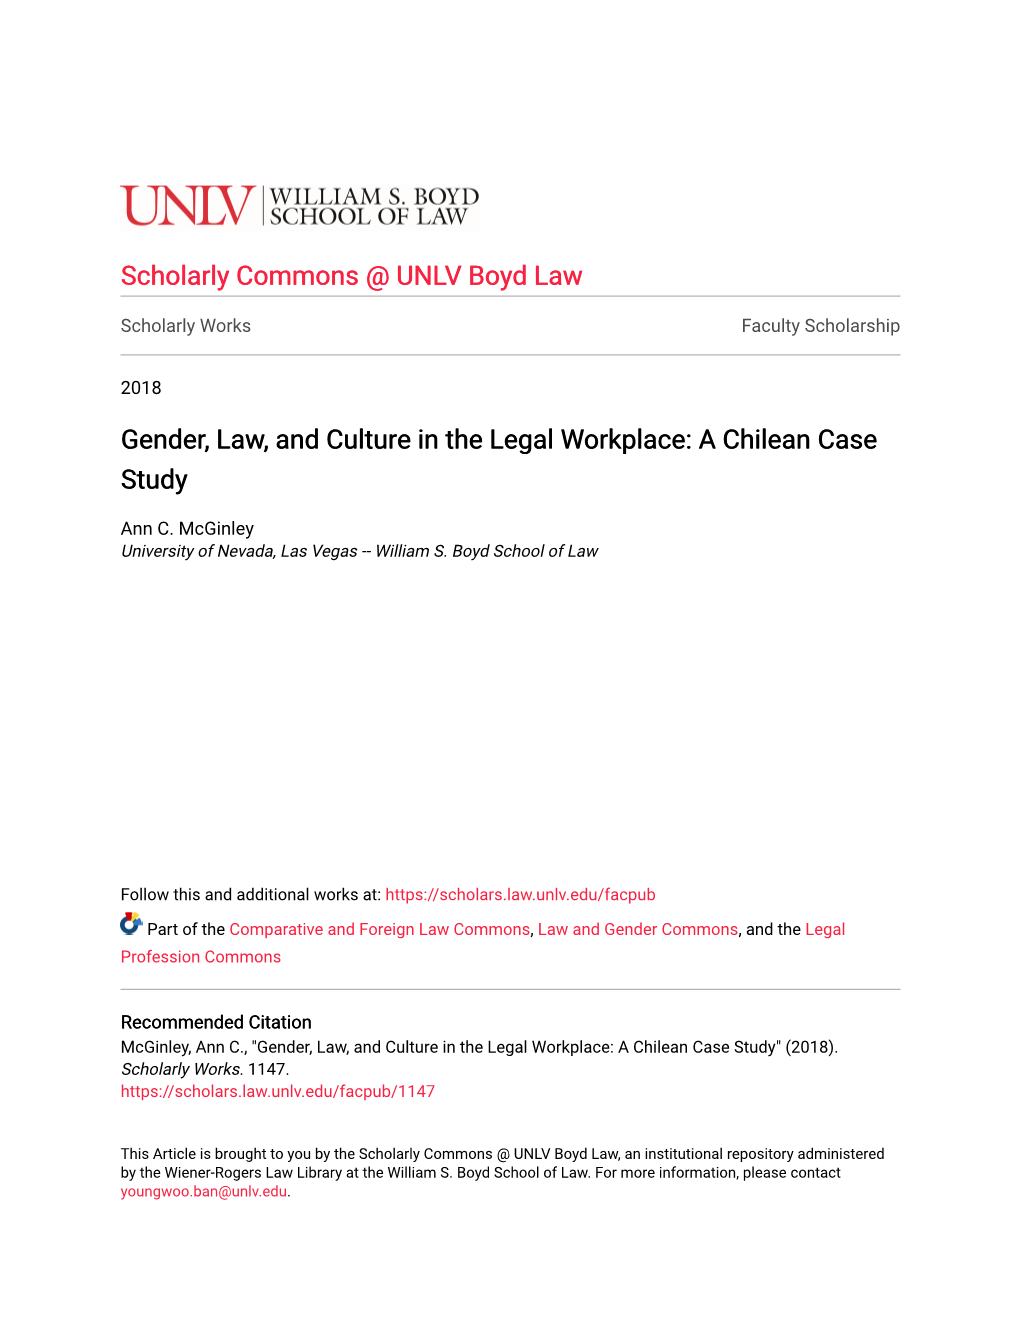 Gender, Law, and Culture in the Legal Workplace: a Chilean Case Study